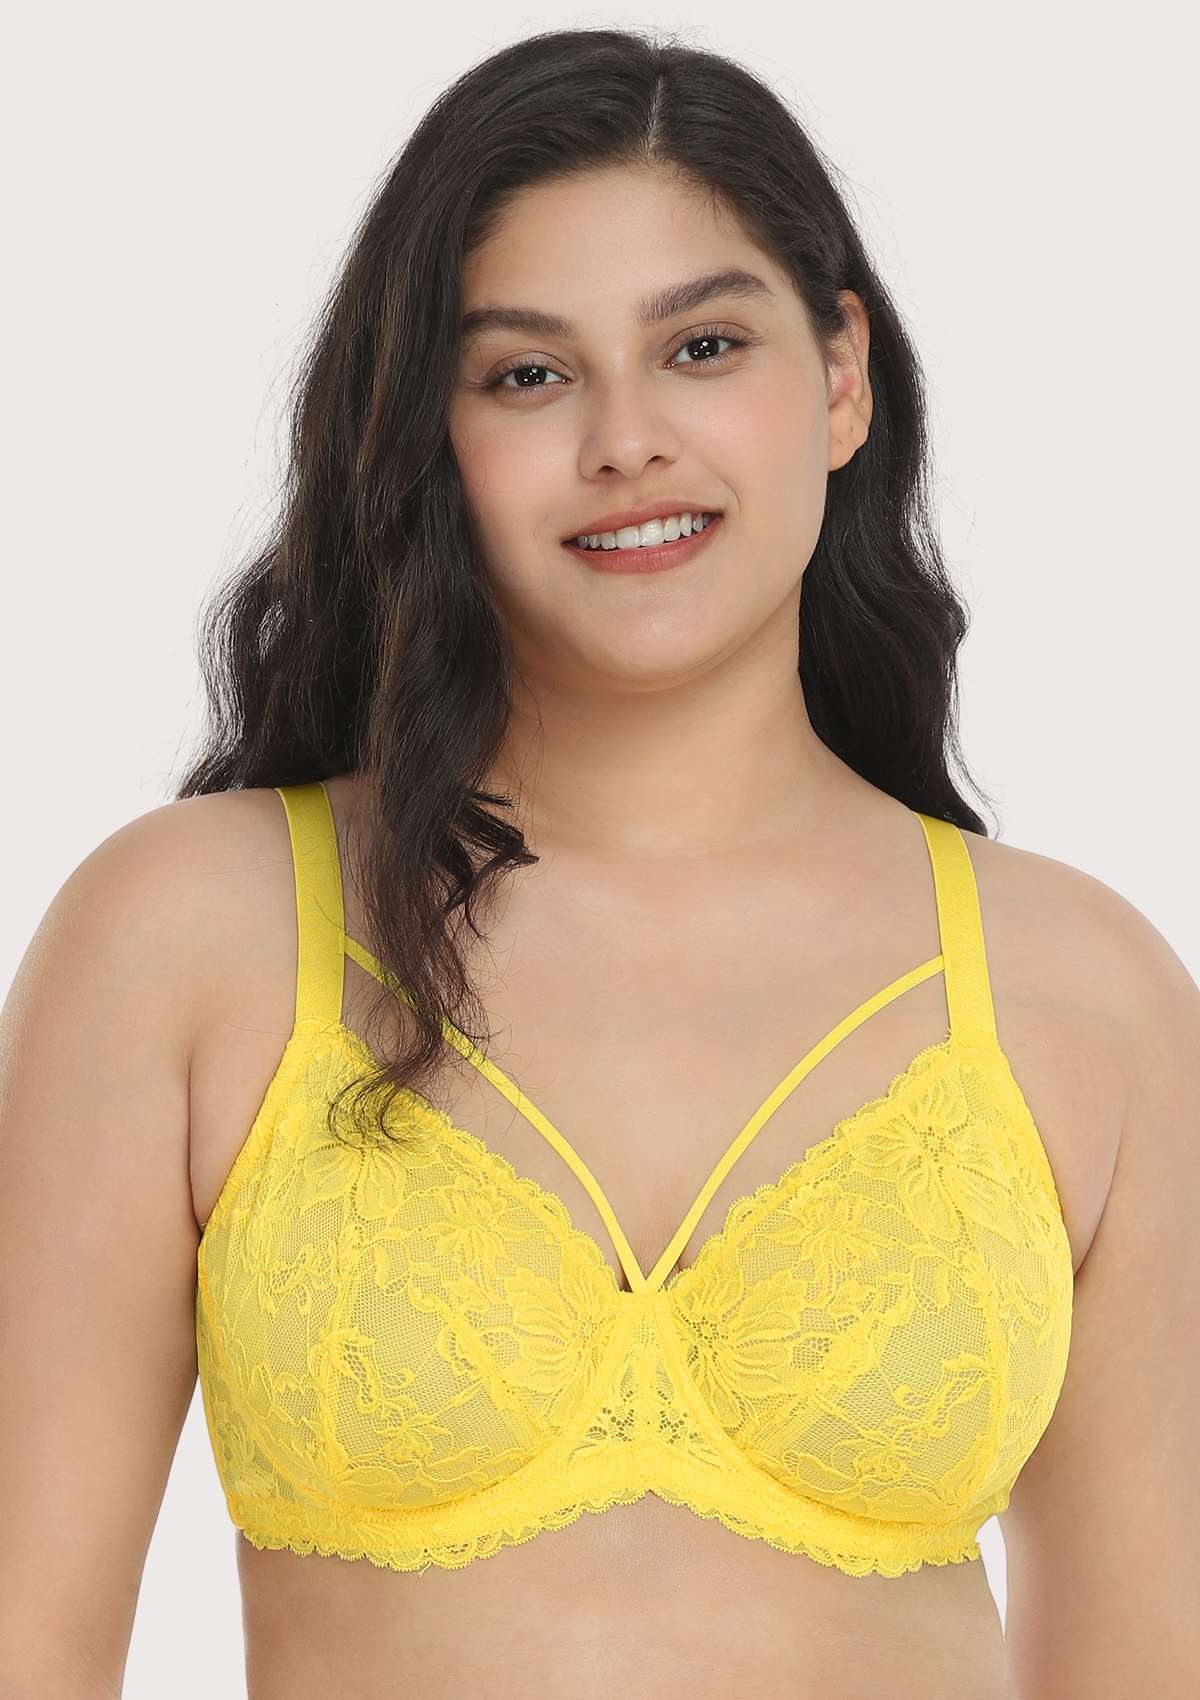 HSIA Unlined Lace Mesh Minimizer Bra For Large Breasts, Full Coverage - Bright Yellow / 44 / D